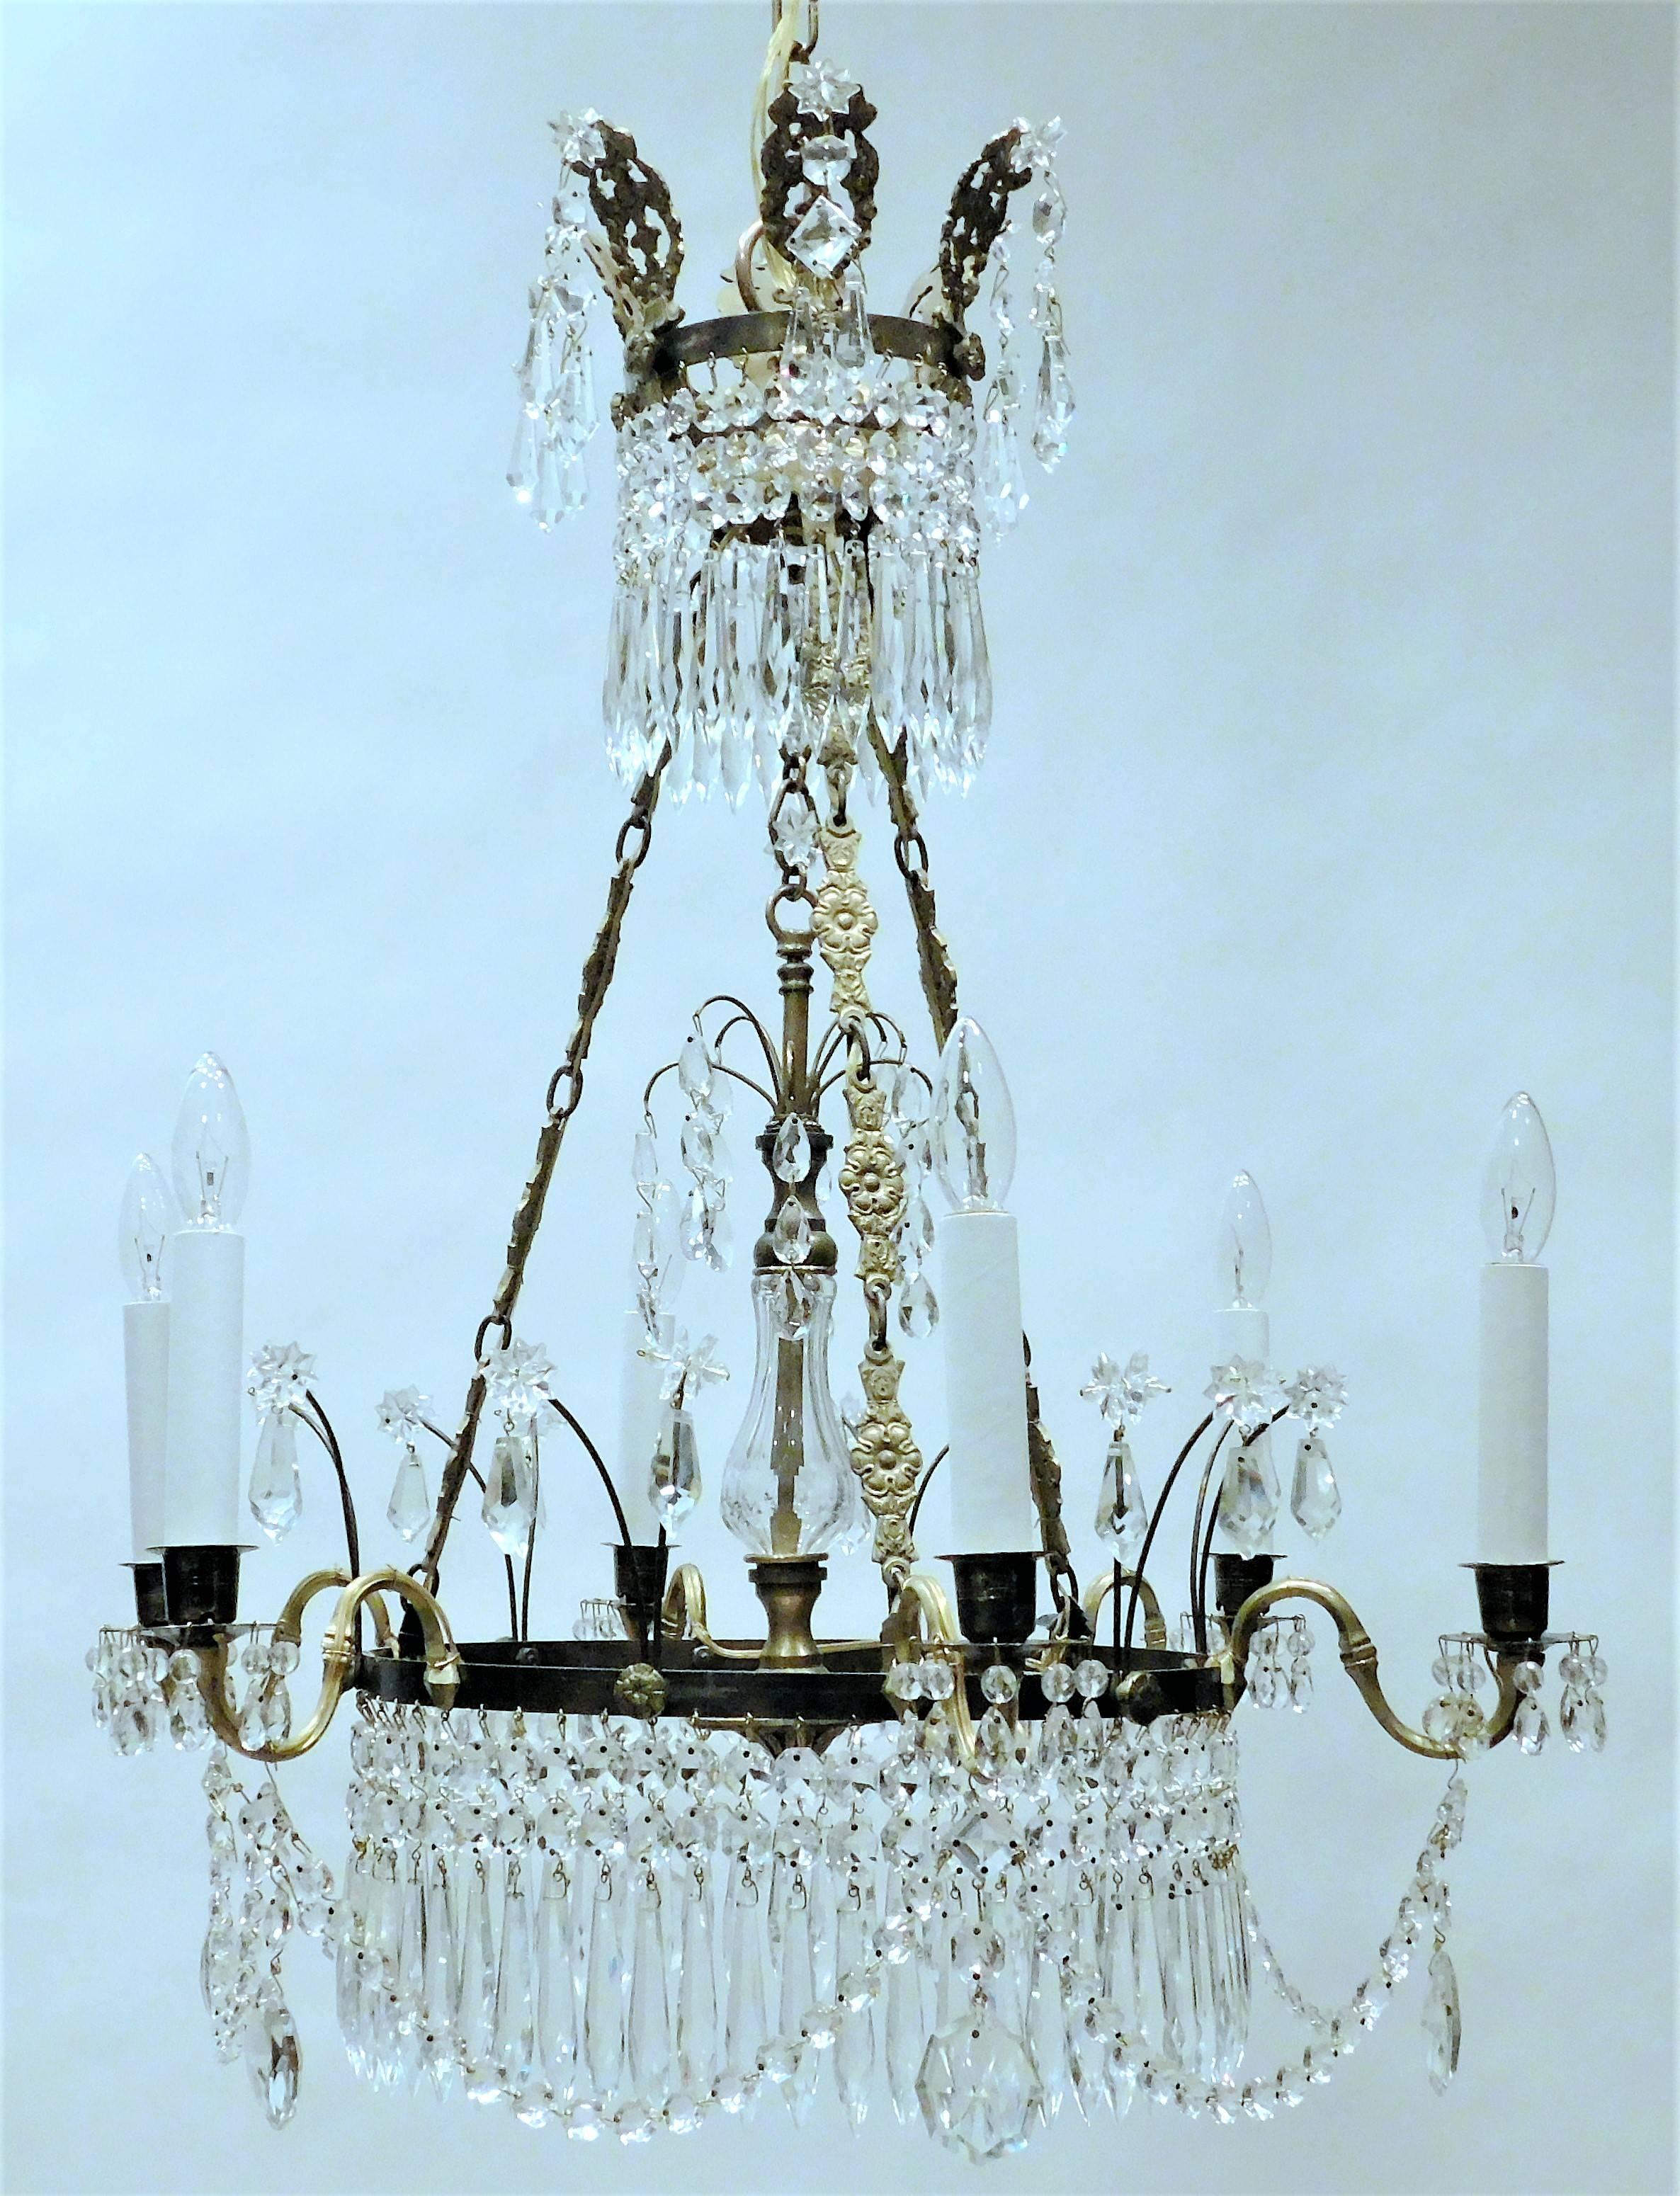 This fixture has 2 concentric rows of hanging icicle lead crystal prisms with hand-wrought brass and gilt brass. Festoons draped between each arm.  Free-hanging pendant in center. Copy of an early 19th century candle fixture.  Hanging hardware,